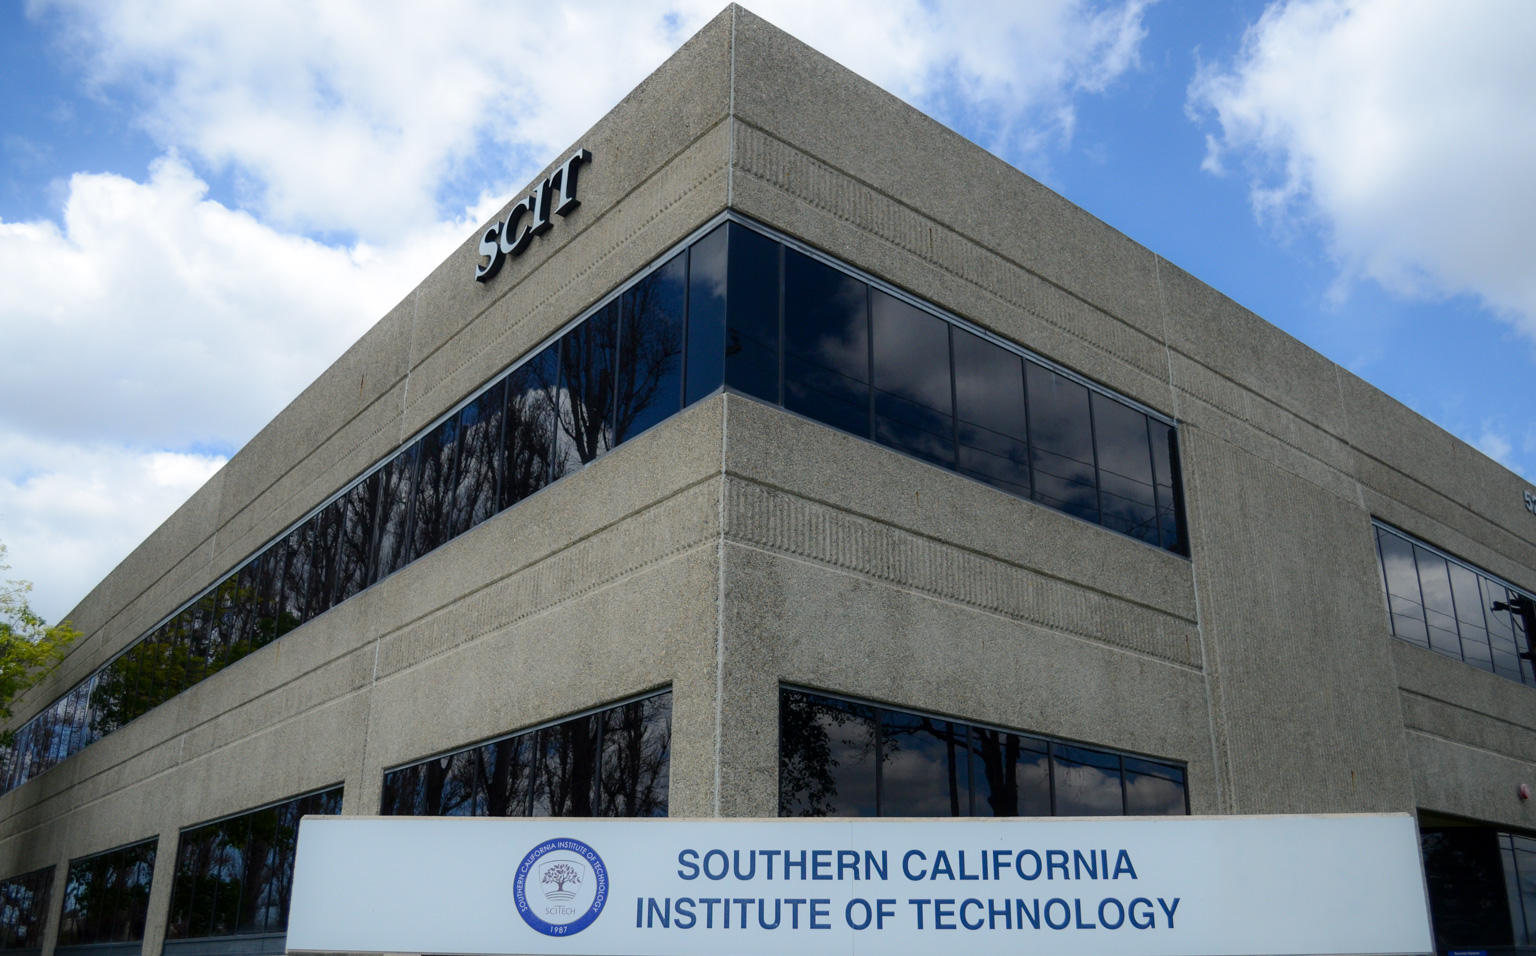 About SCIT Southern California Institute of Technology